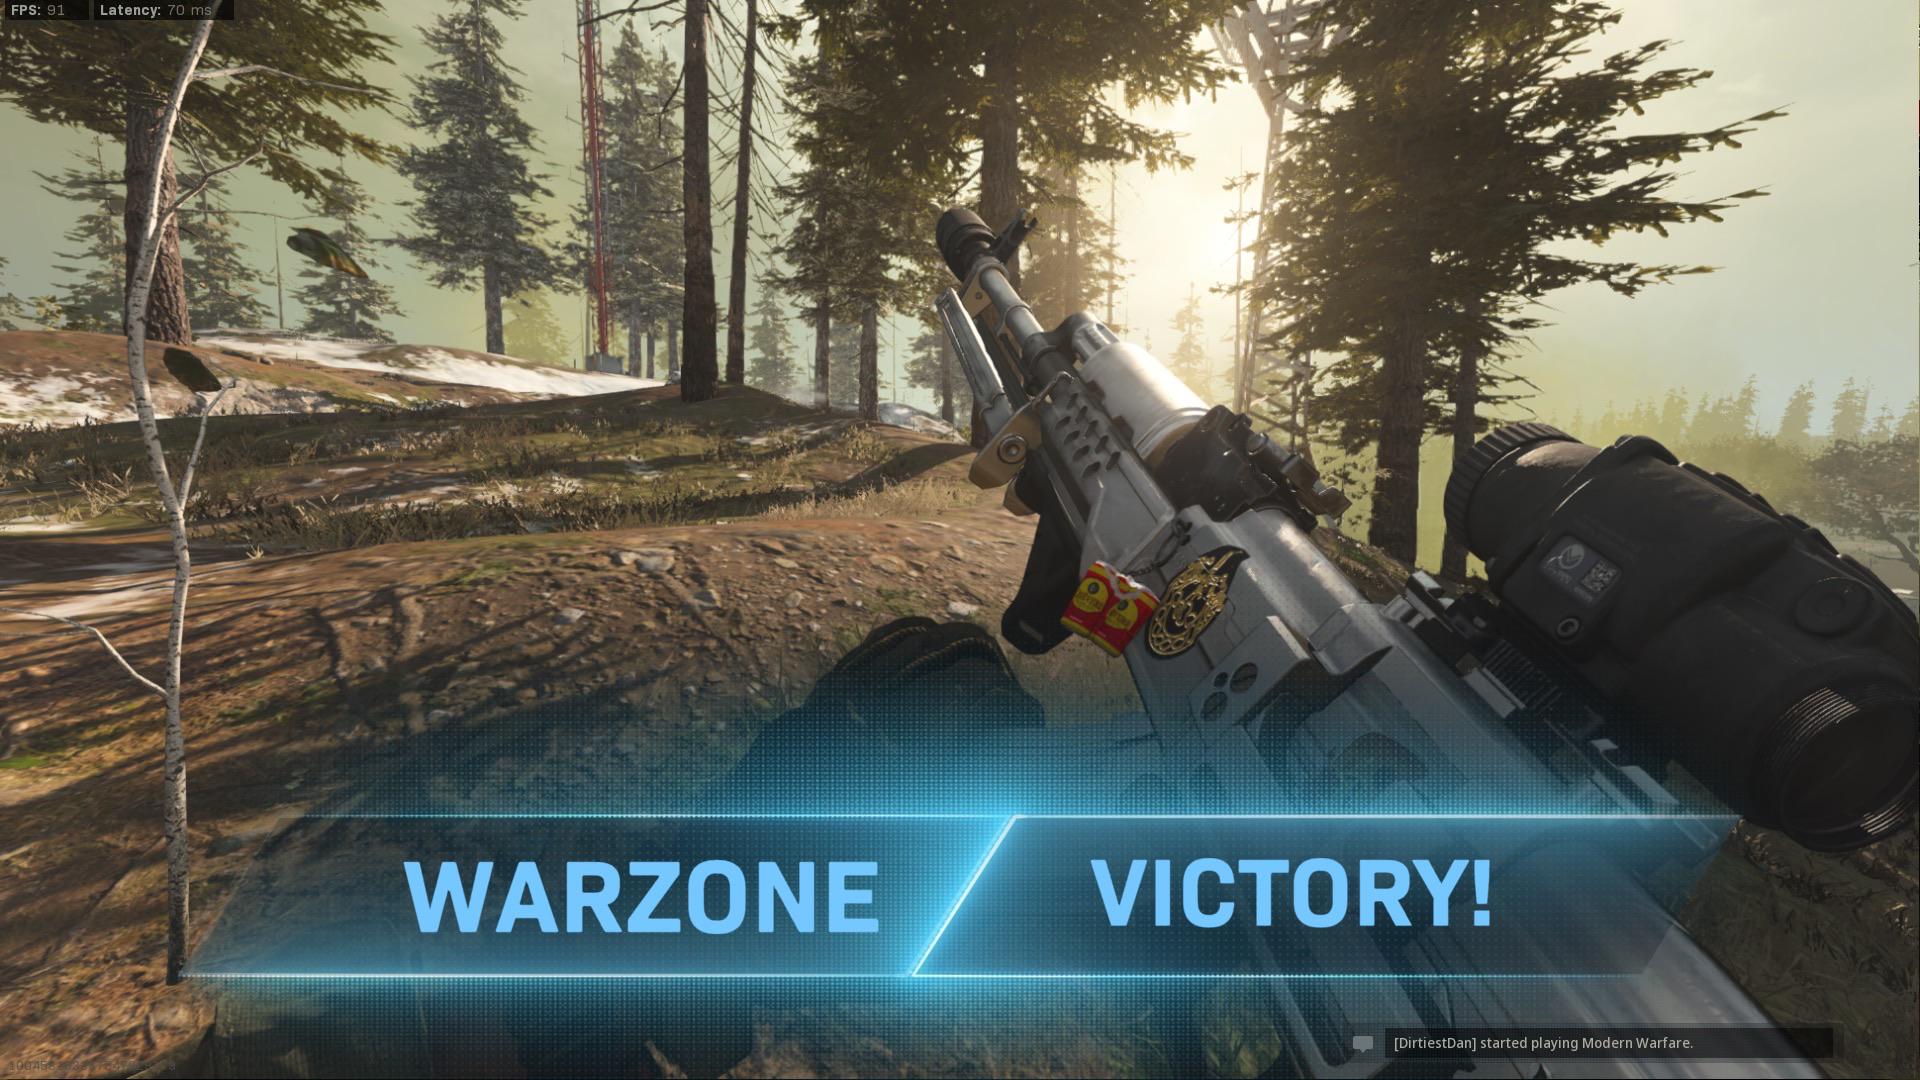 10 Call of Duty Warzone Tips To Help You Win Duos, Trios, And Quads